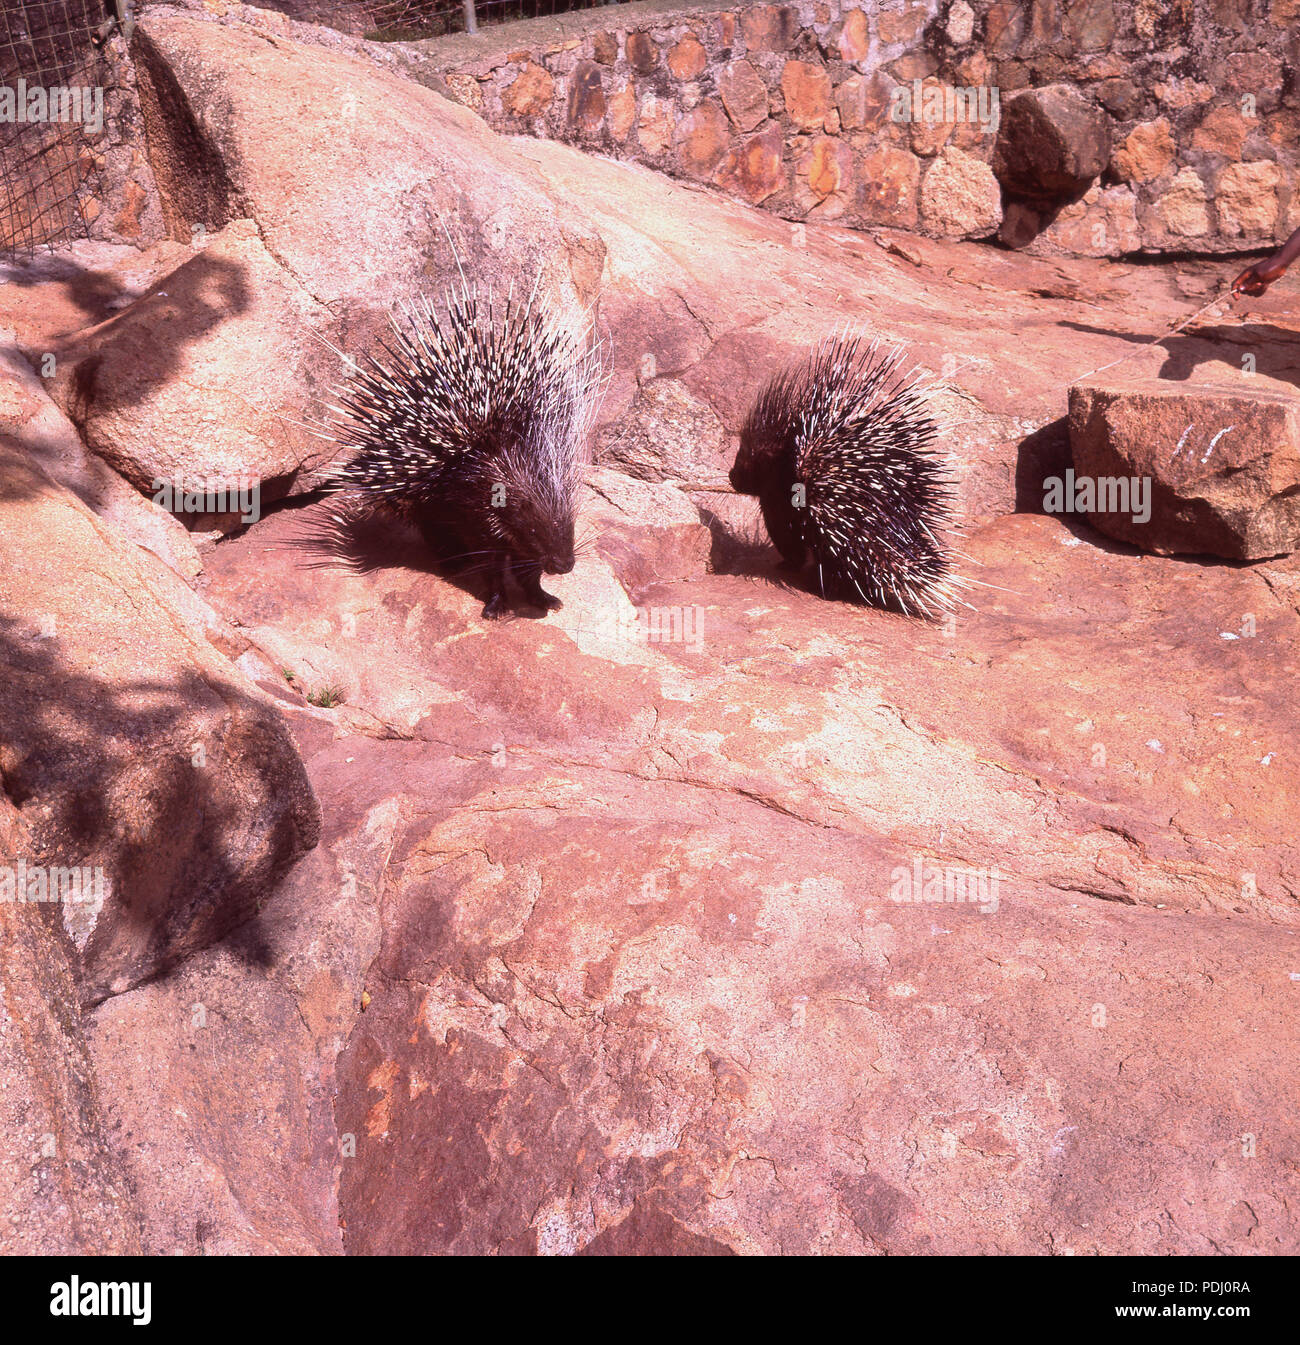 1960s, historical, summertime and old world porcupines outside on rocks in a zoo. These large rodents have a coat of sharp spines or quills to protect aginst predators. Stock Photo